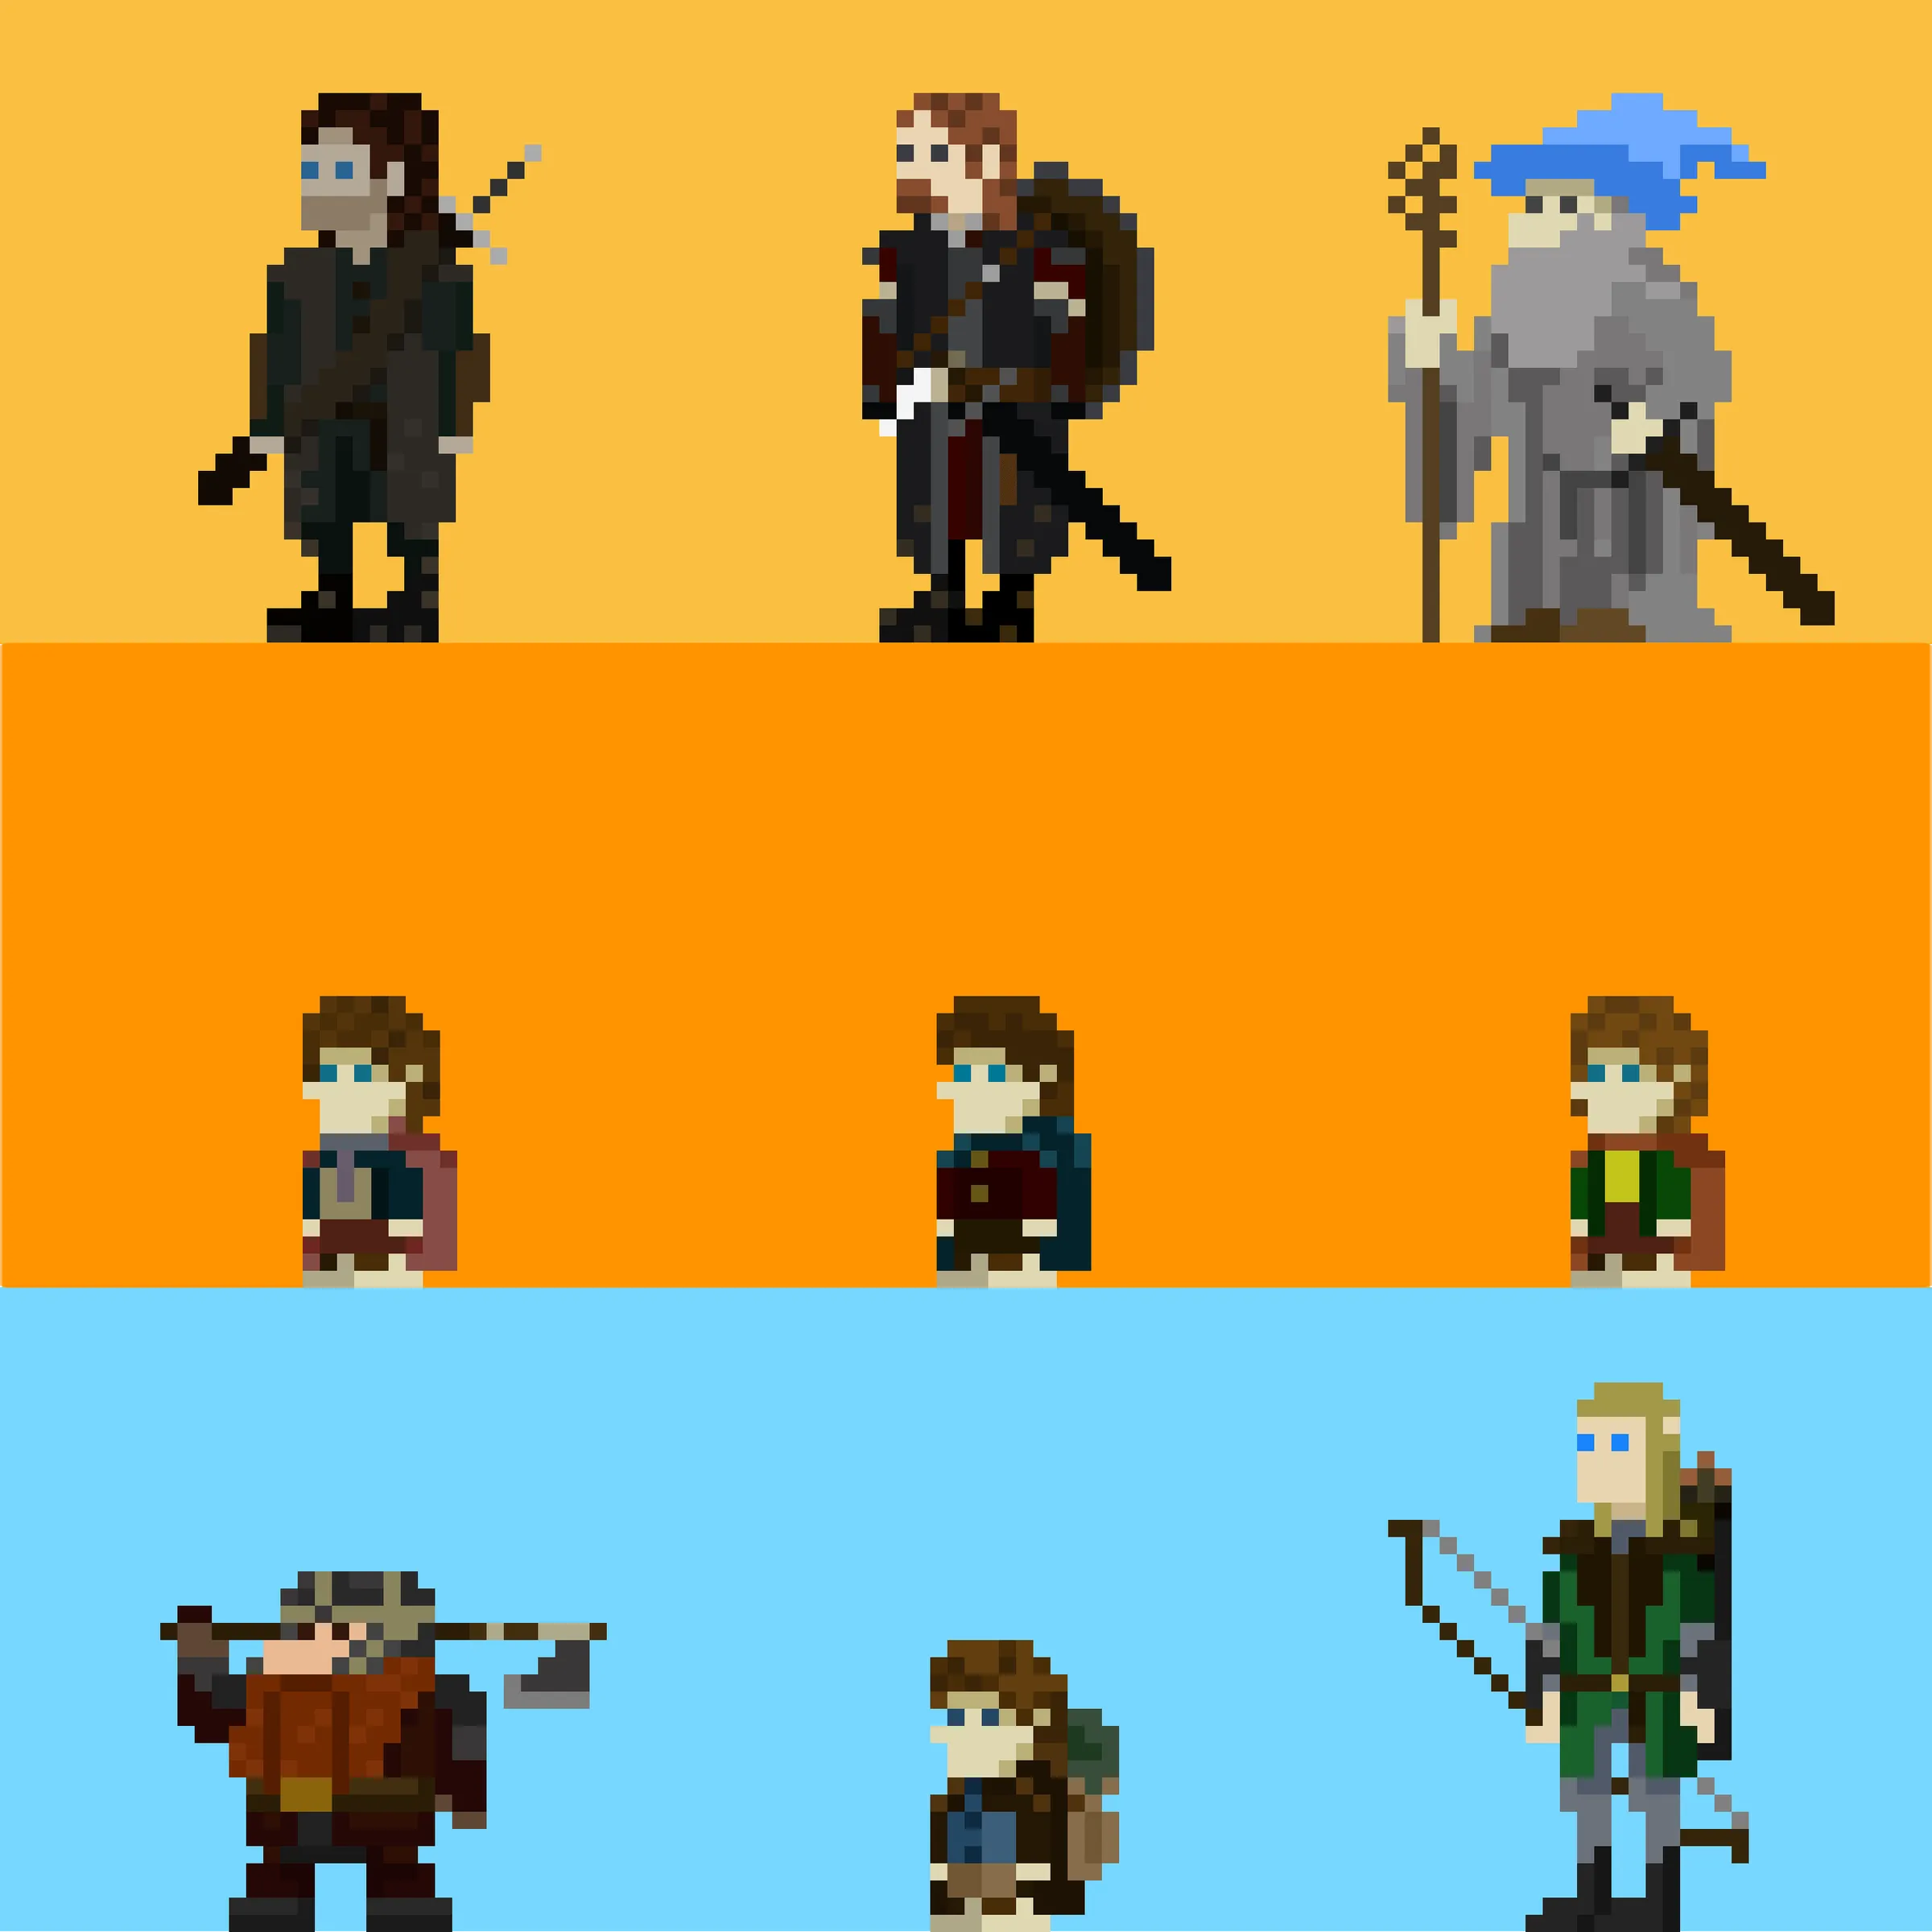 Pixel art of Fellowship of the Rings characters